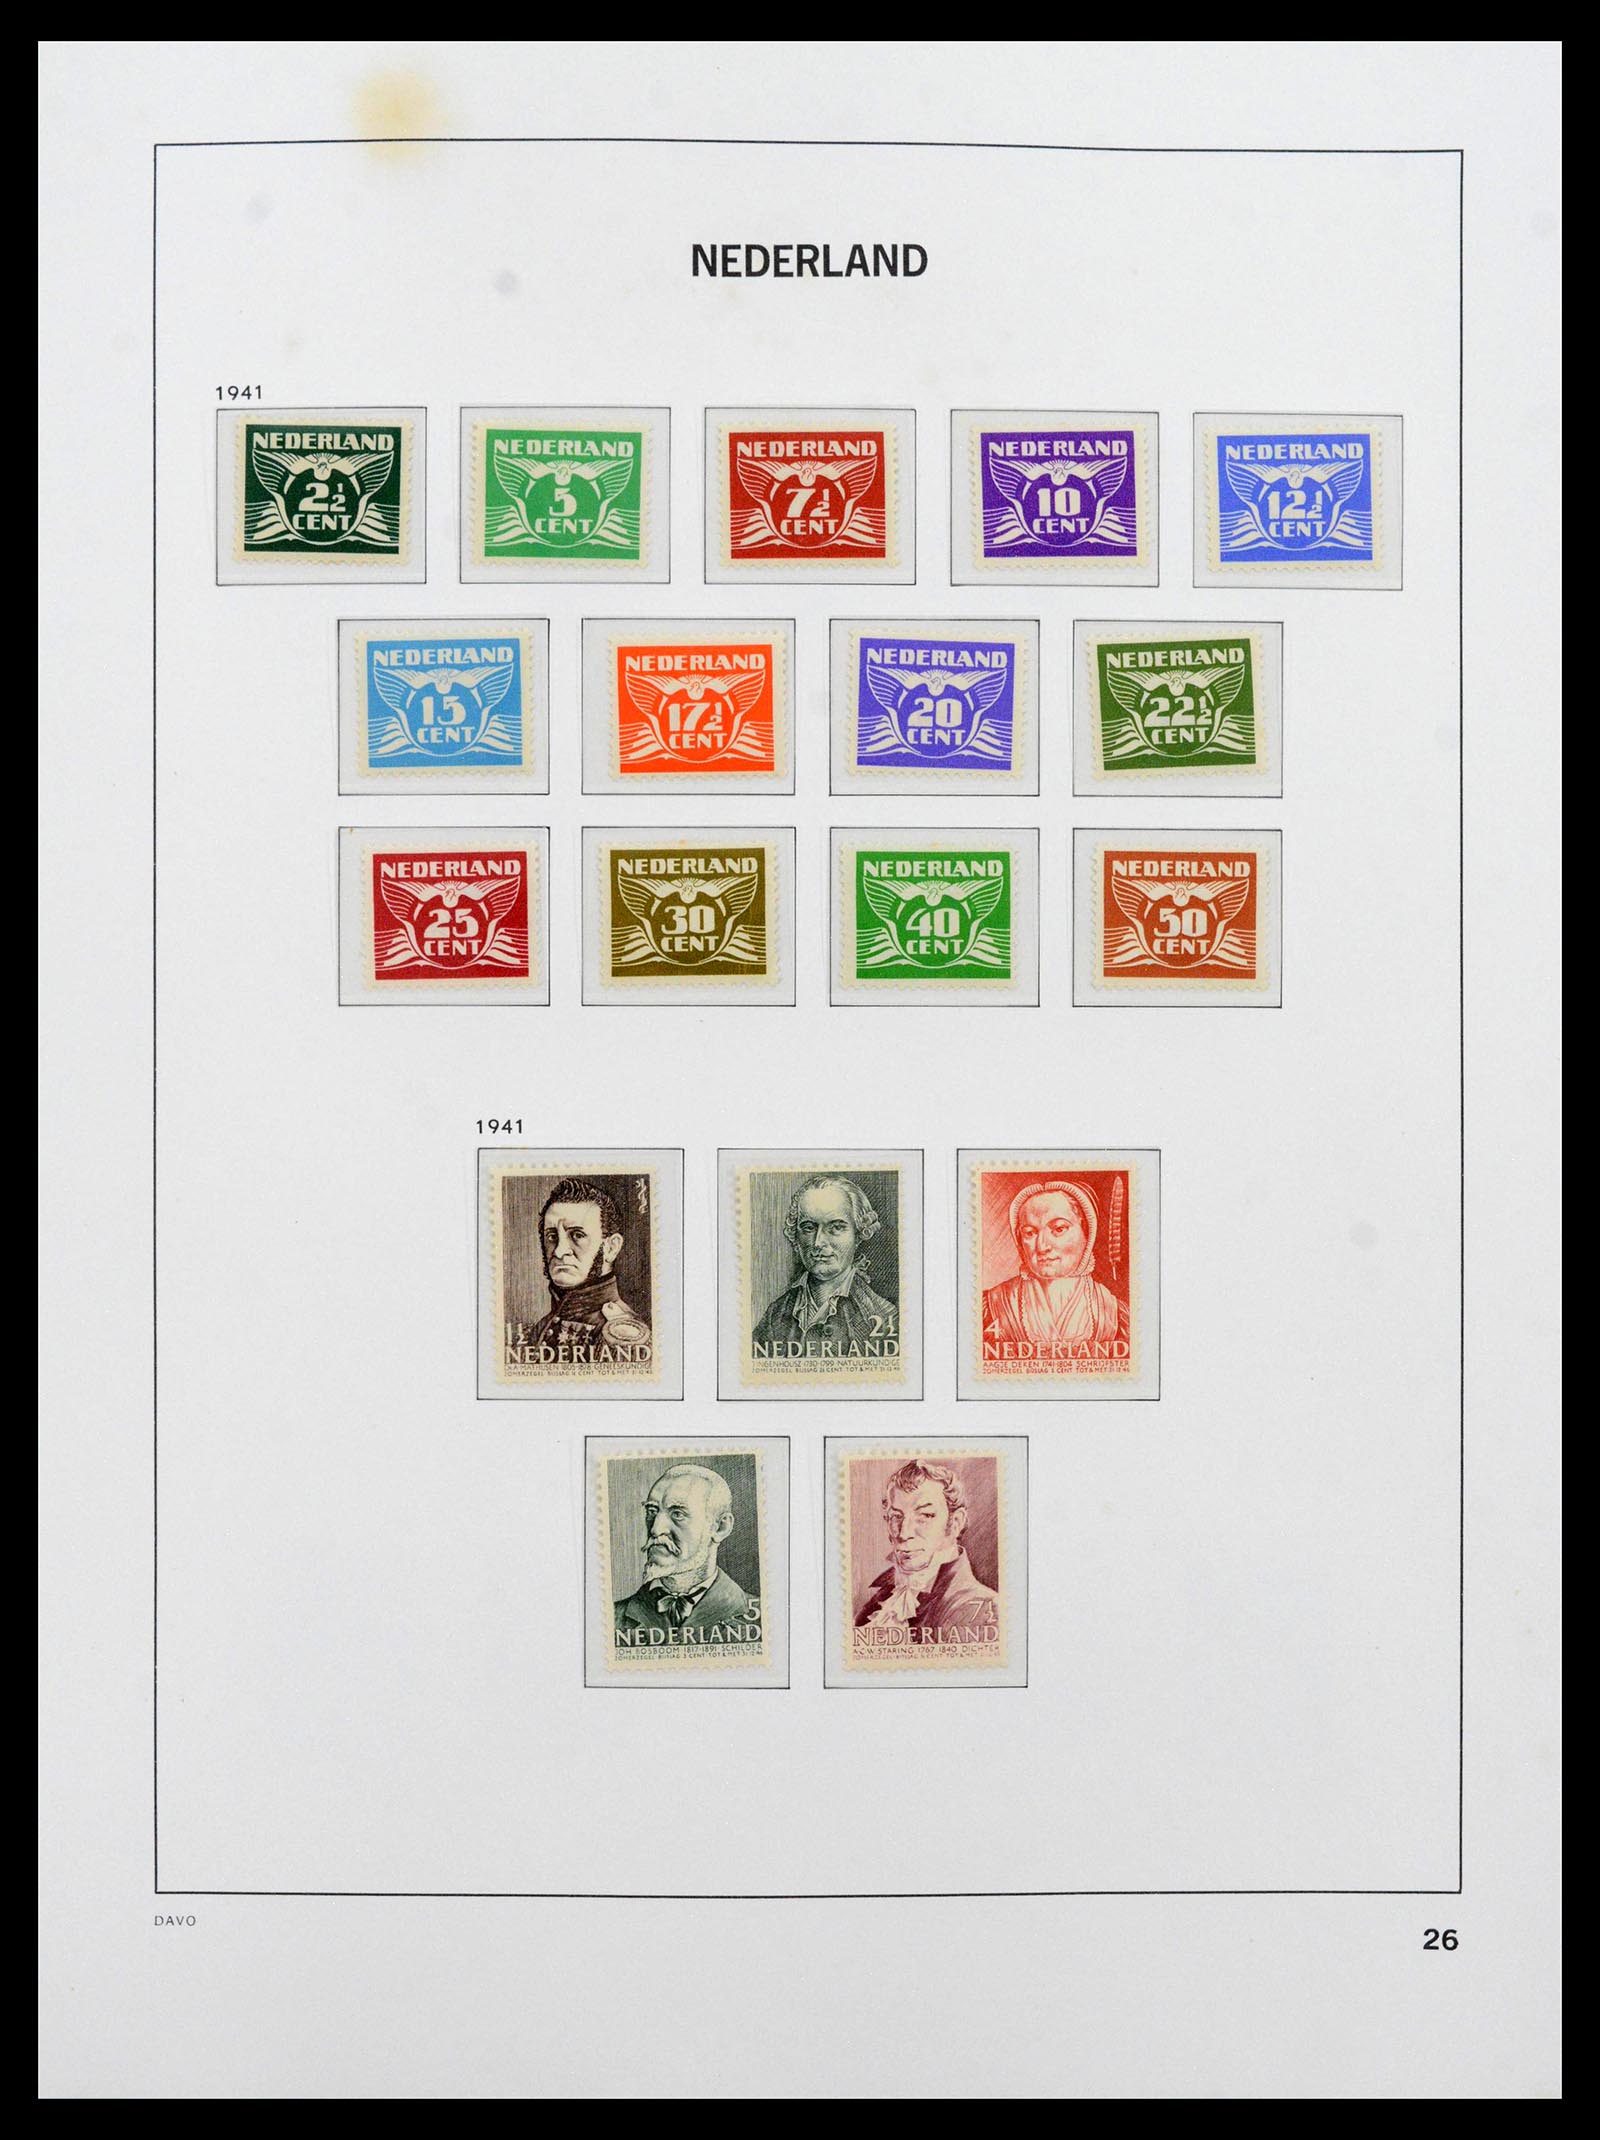 39035 0026 - Stamp collection 39035 Netherlands 1852-1968.